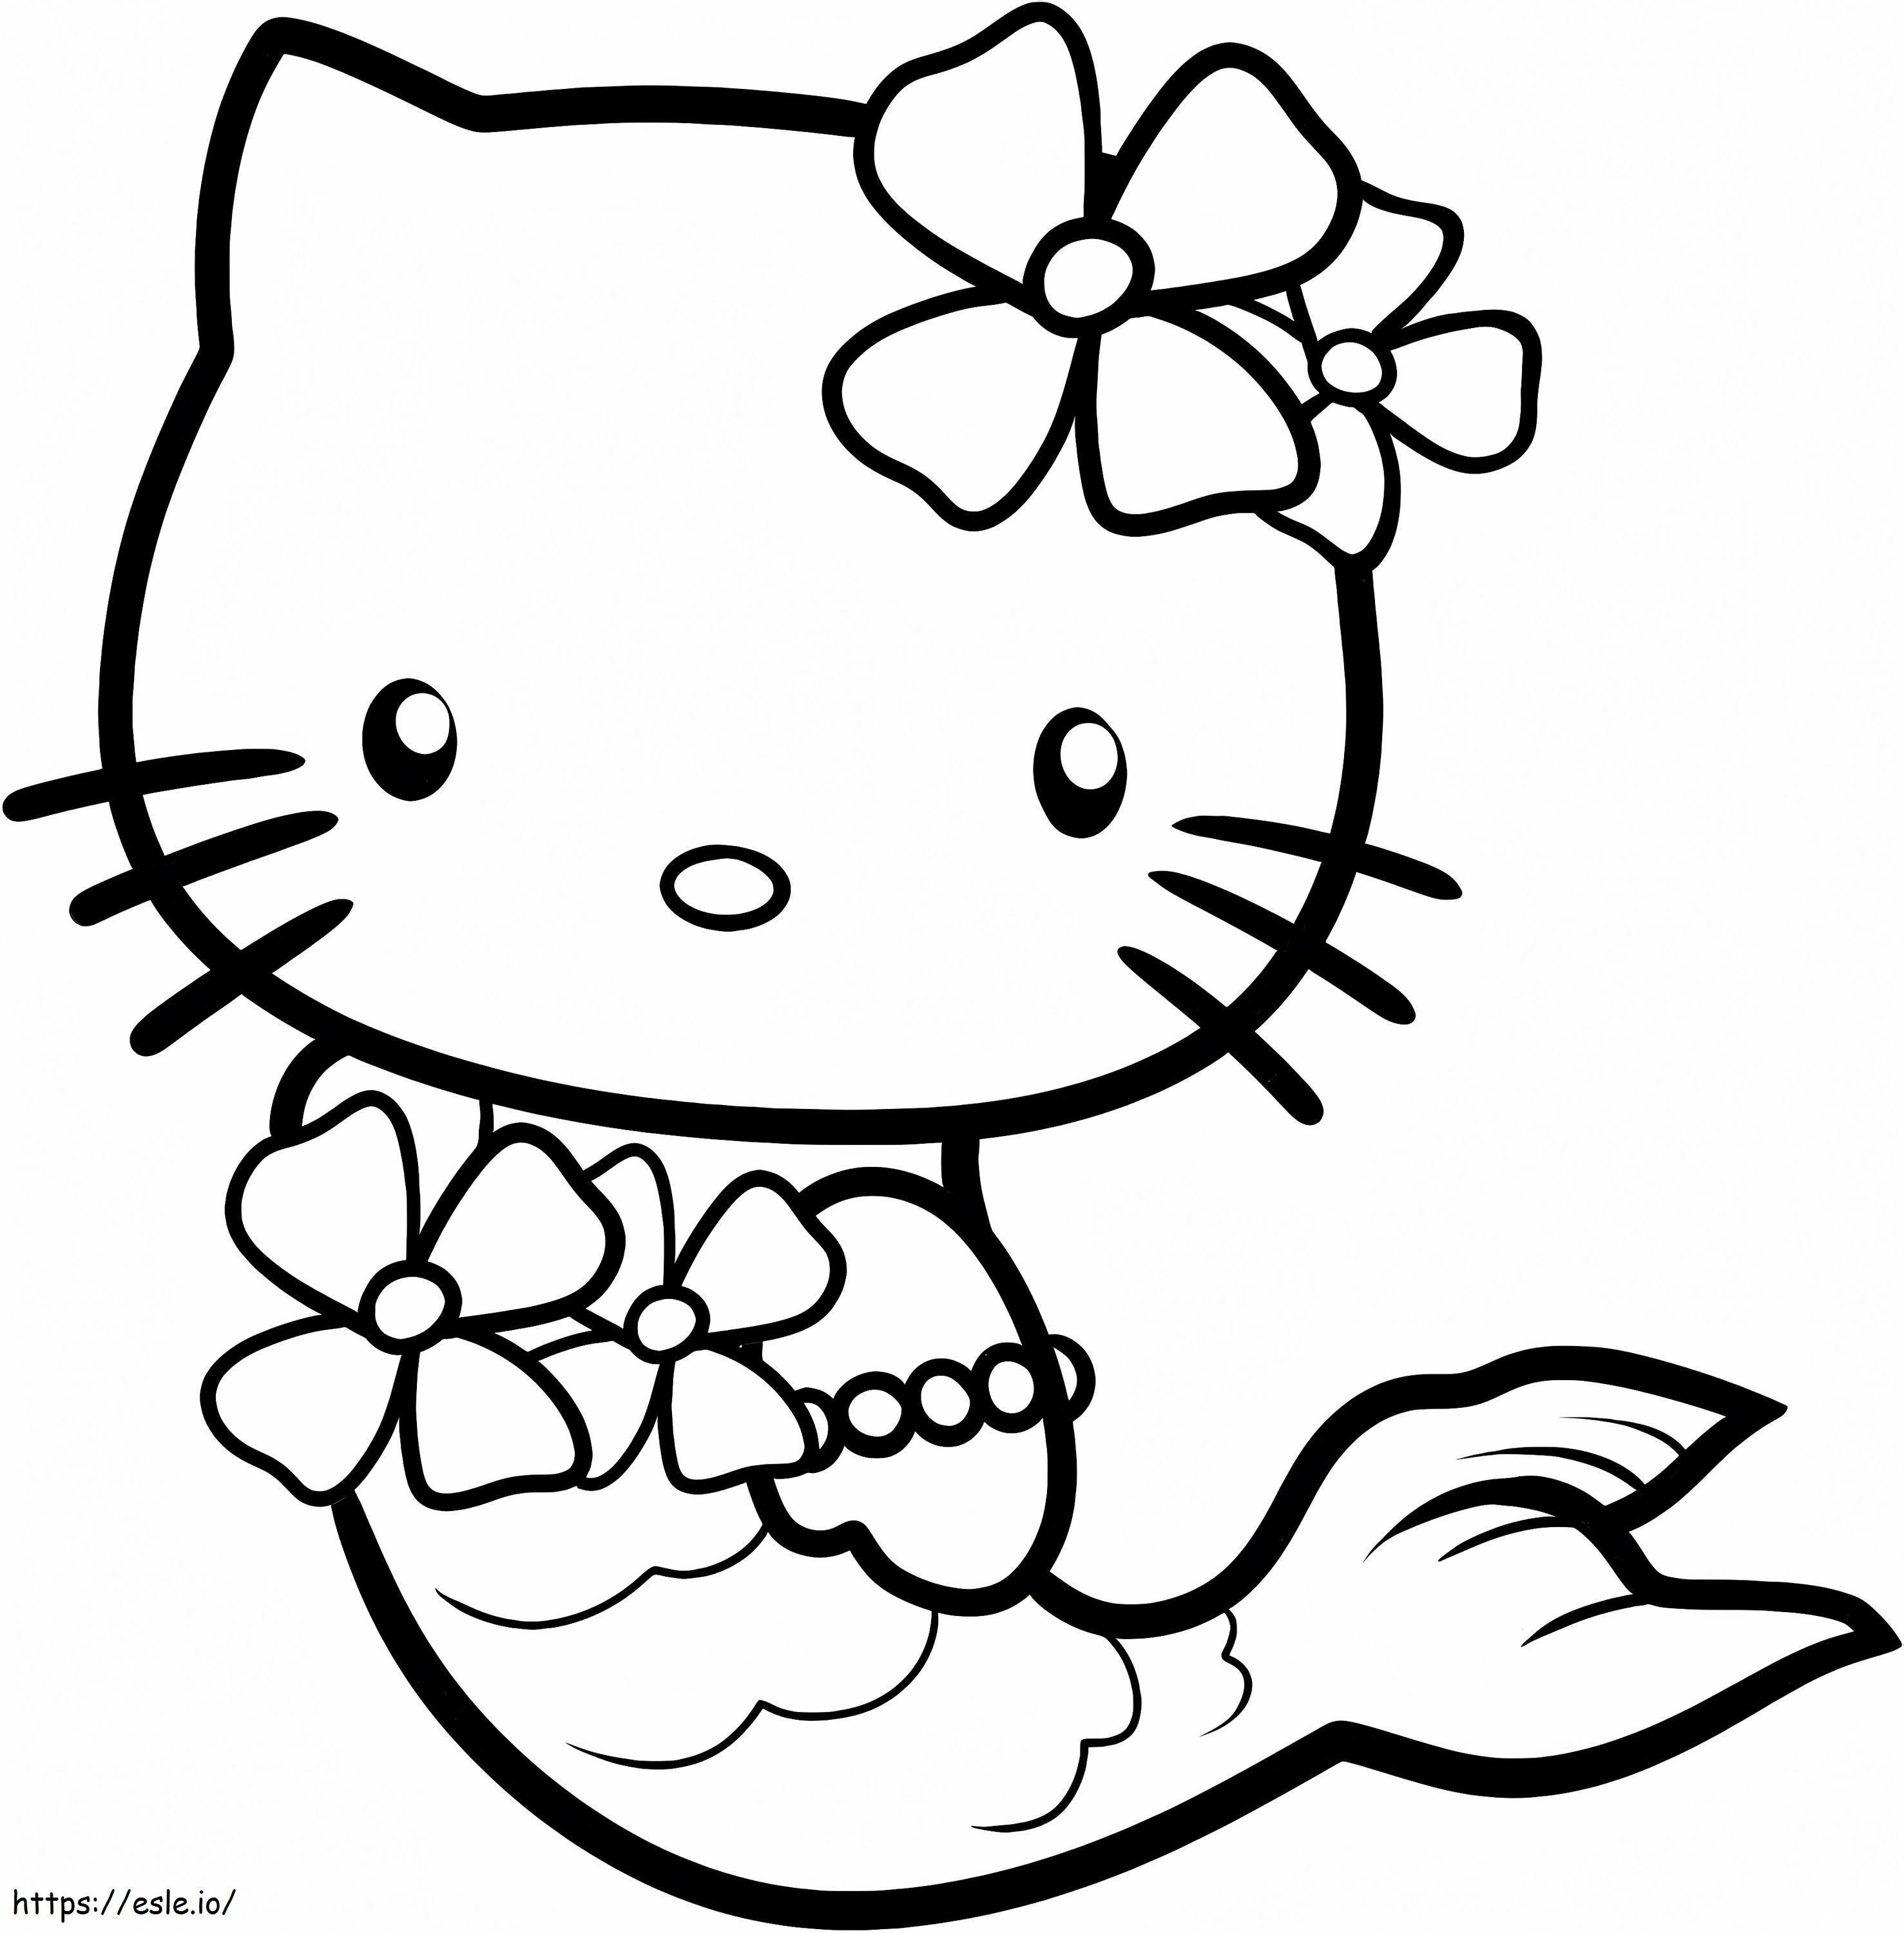 1539941740 Kitty Hello Kitty Sirene Free Kids Pages In 6 Karafbistro Princess Tutu Pictures coloring page